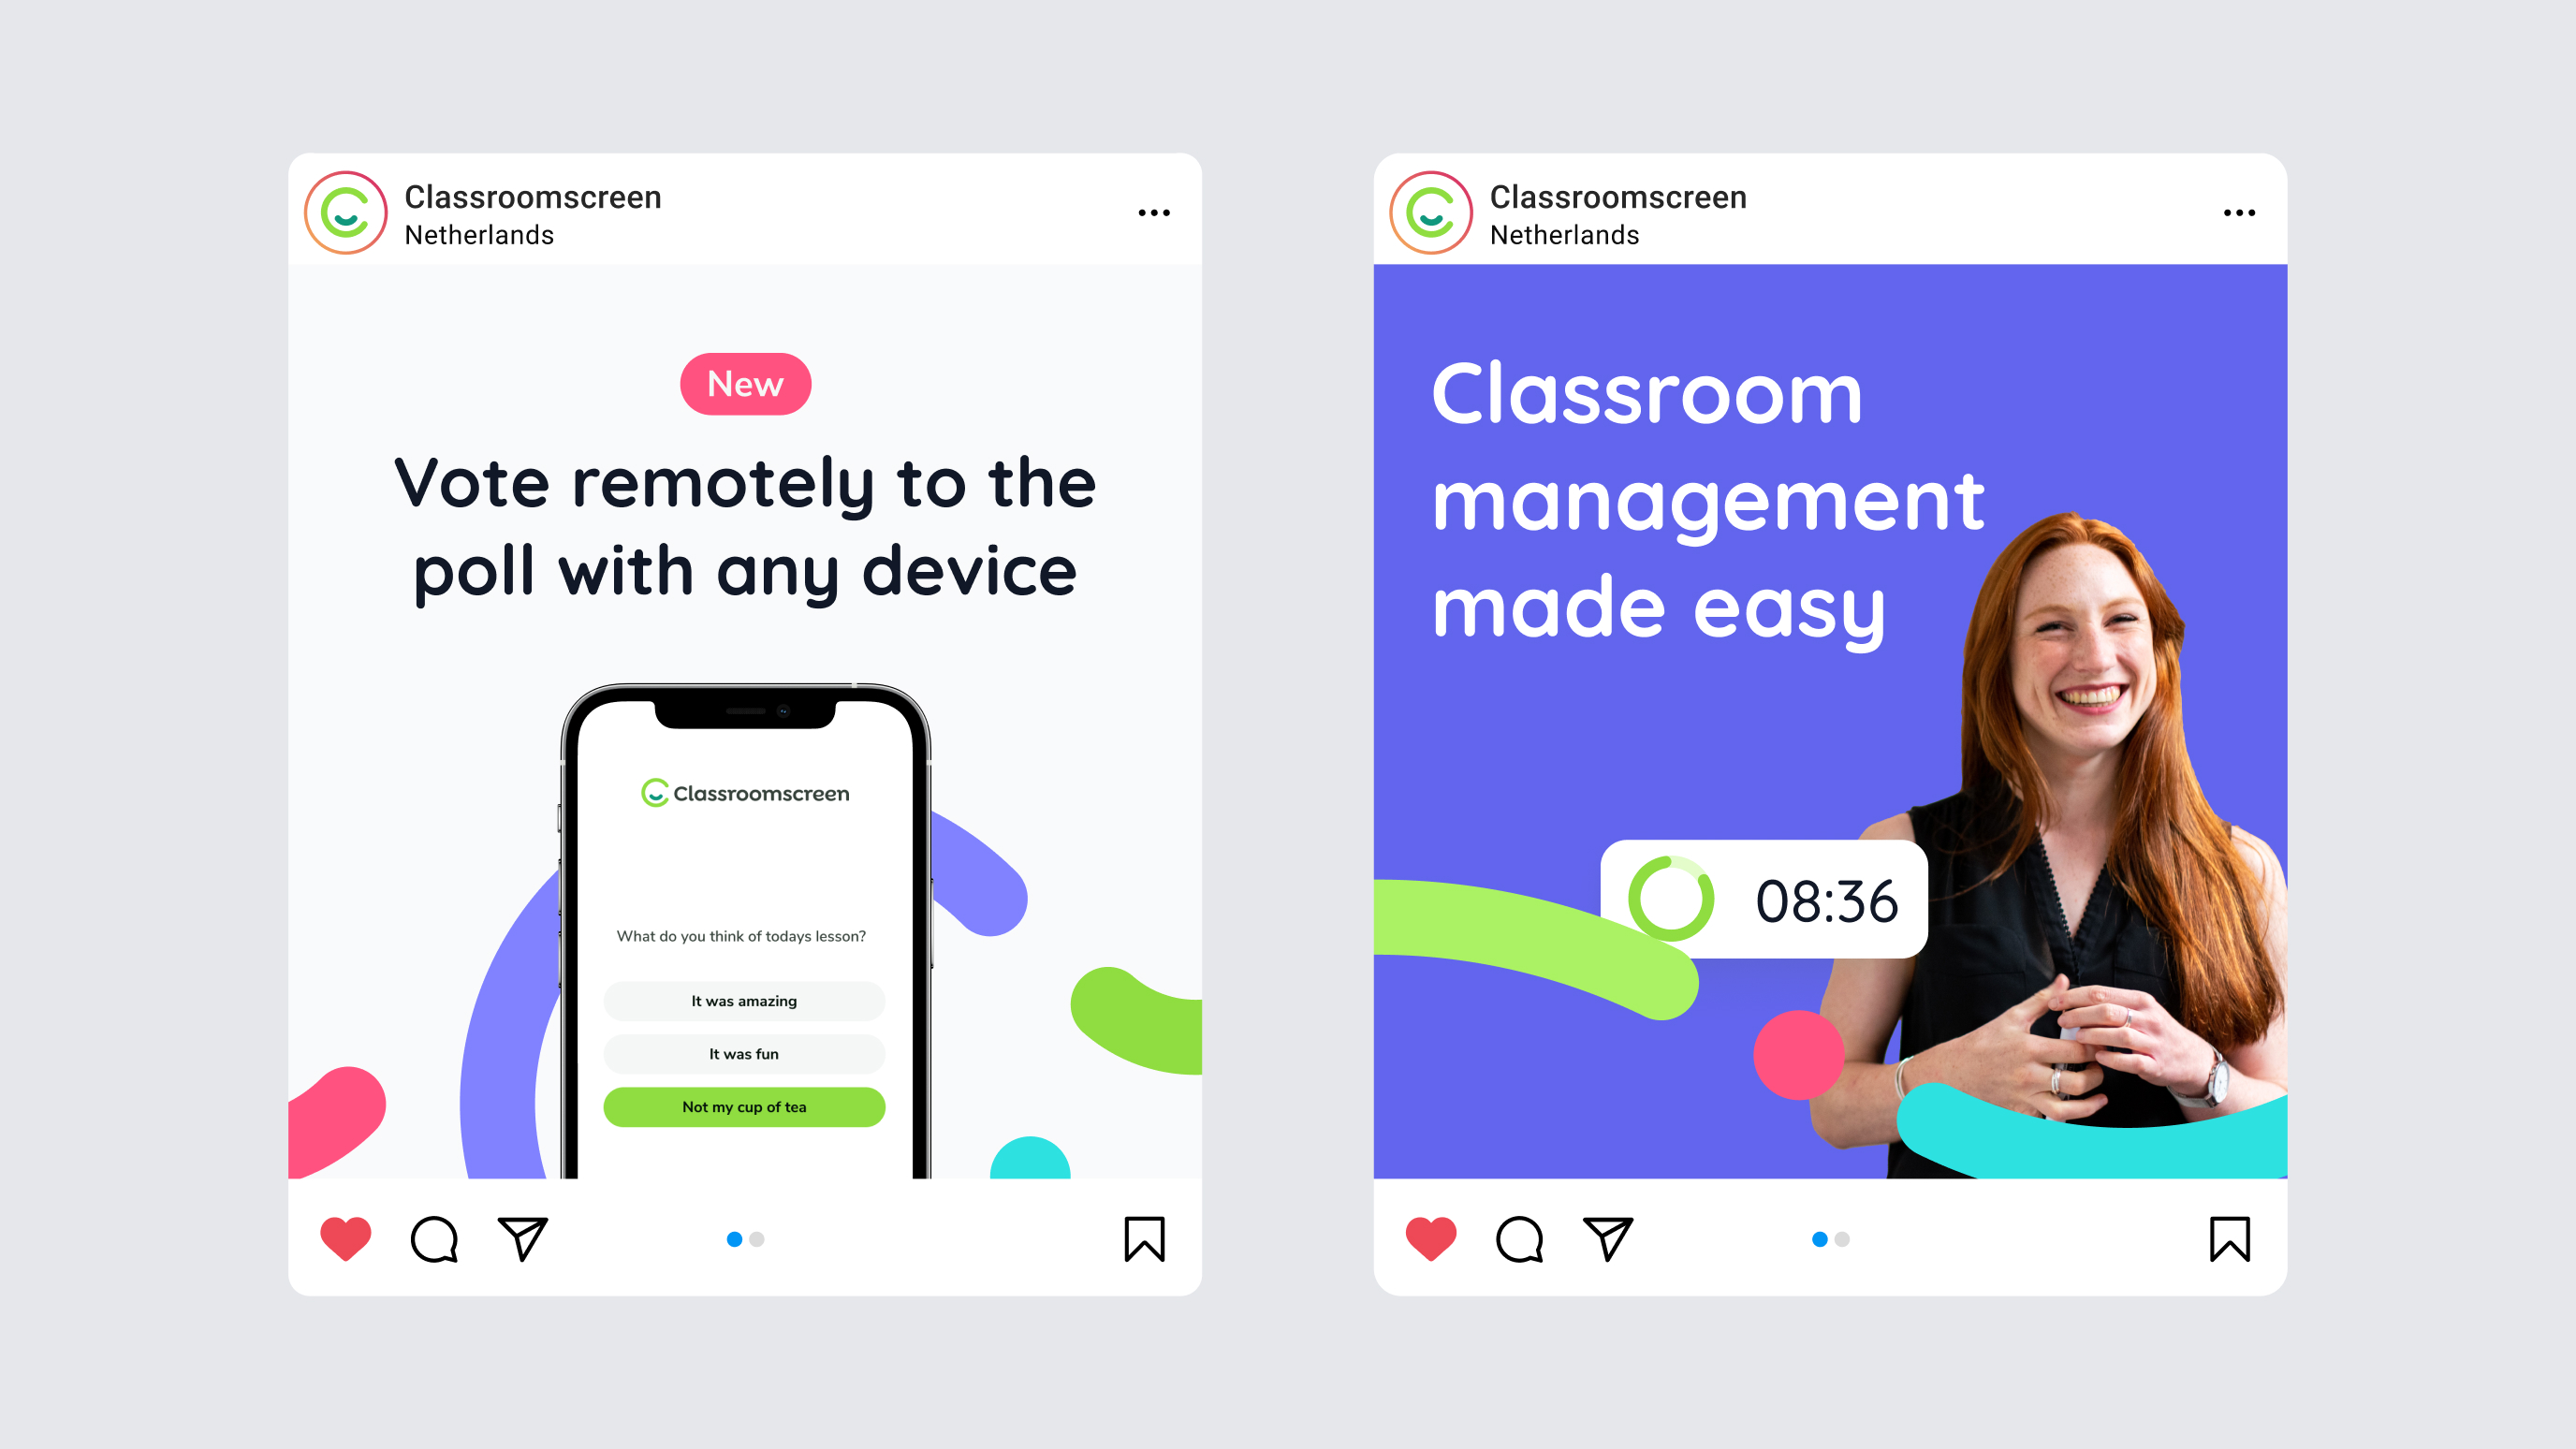 two cards showing an instagram post-like interface with each an ad like post design that matches the new Classroomscreen brand